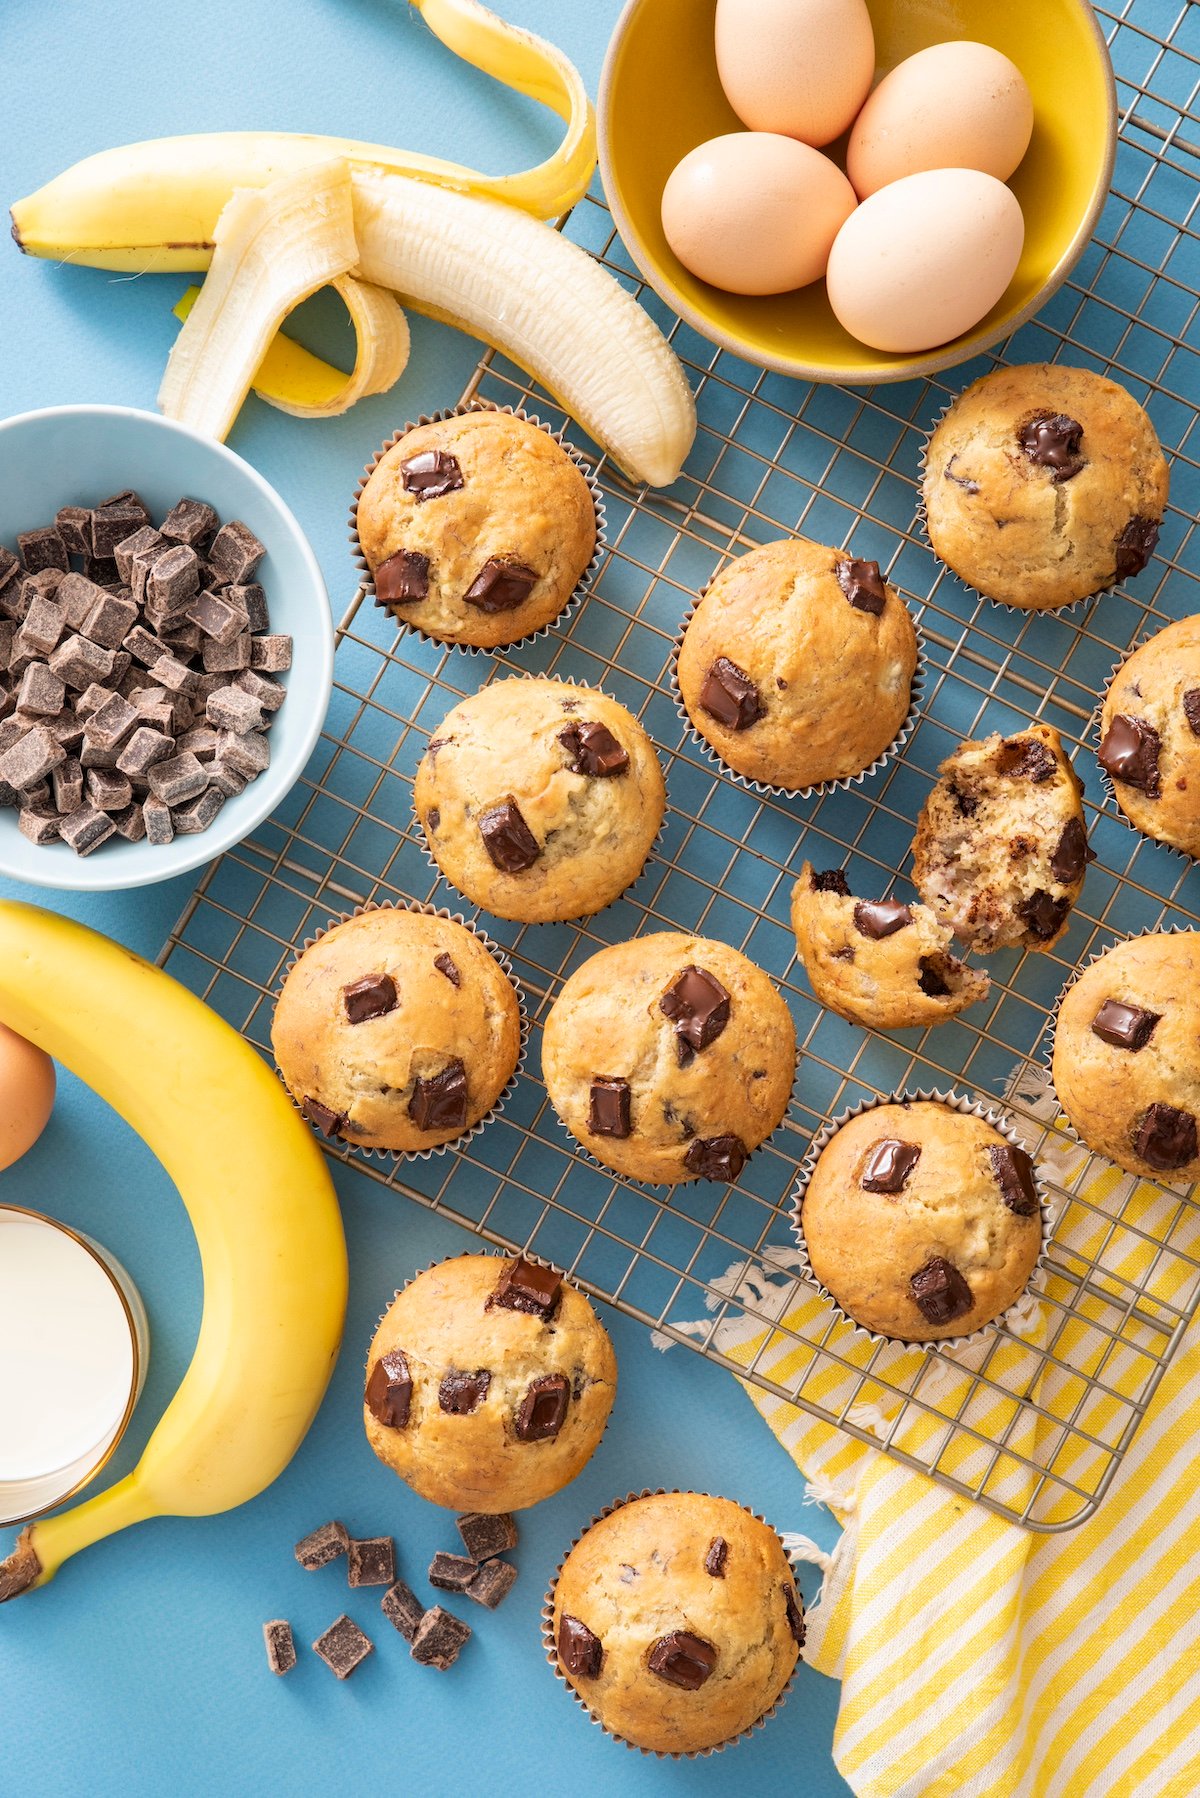 Banana Chocolate Chip muffins cooling on wire rack.